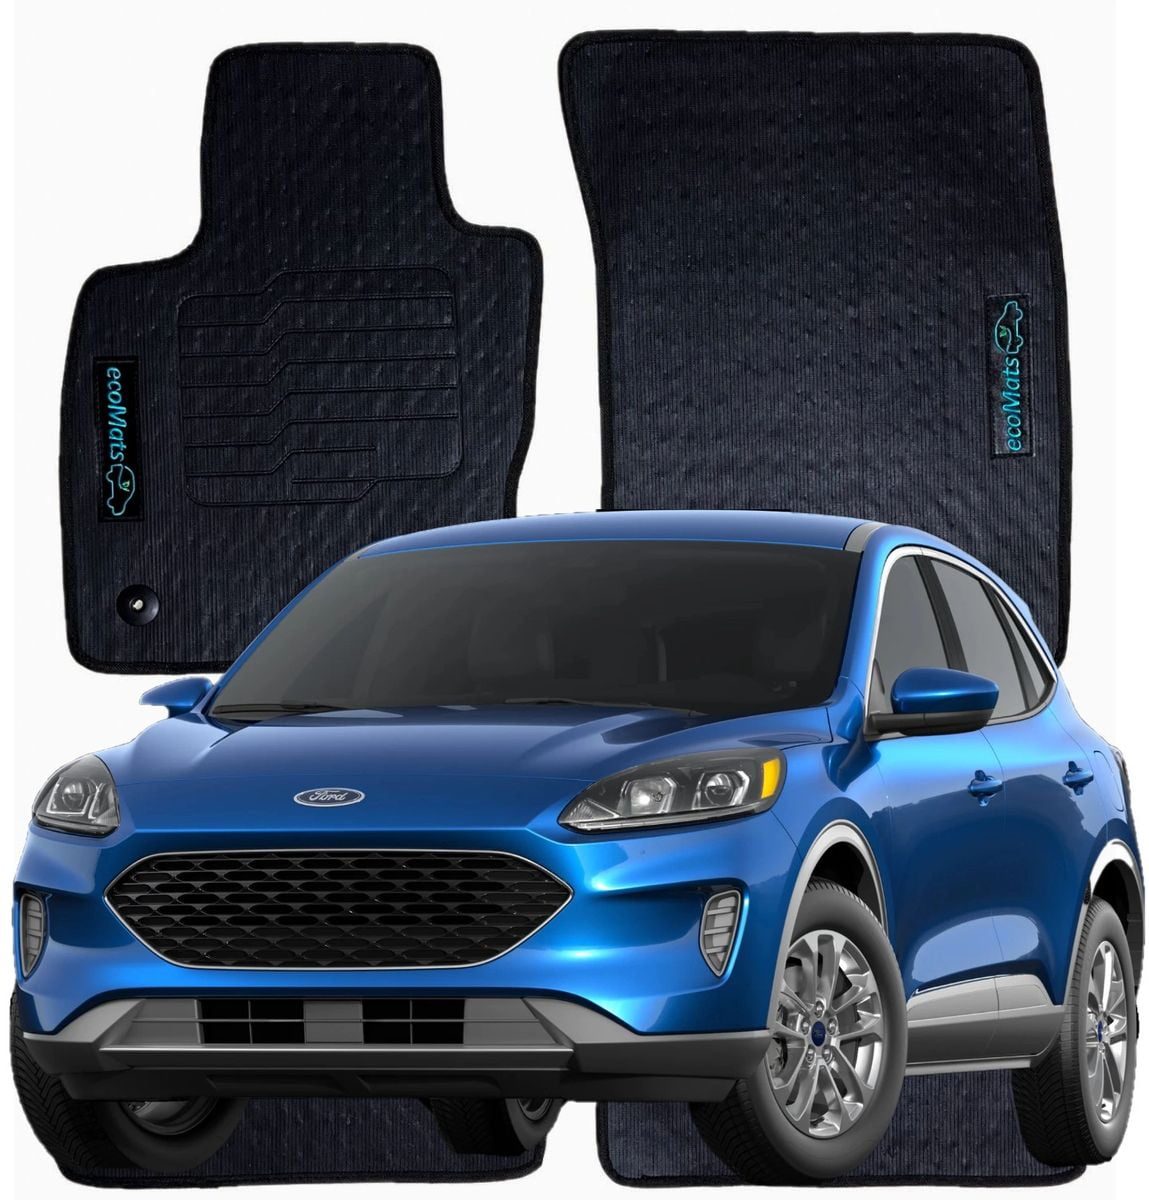 Rear Full Set Liners Custom fit TPE Floor Liners for 2013-2019 Ford Escape Heavy Duty Rubber 1st and 2nd Row: Front OsoTorero Floor Mats for 13-19 Ford Escape